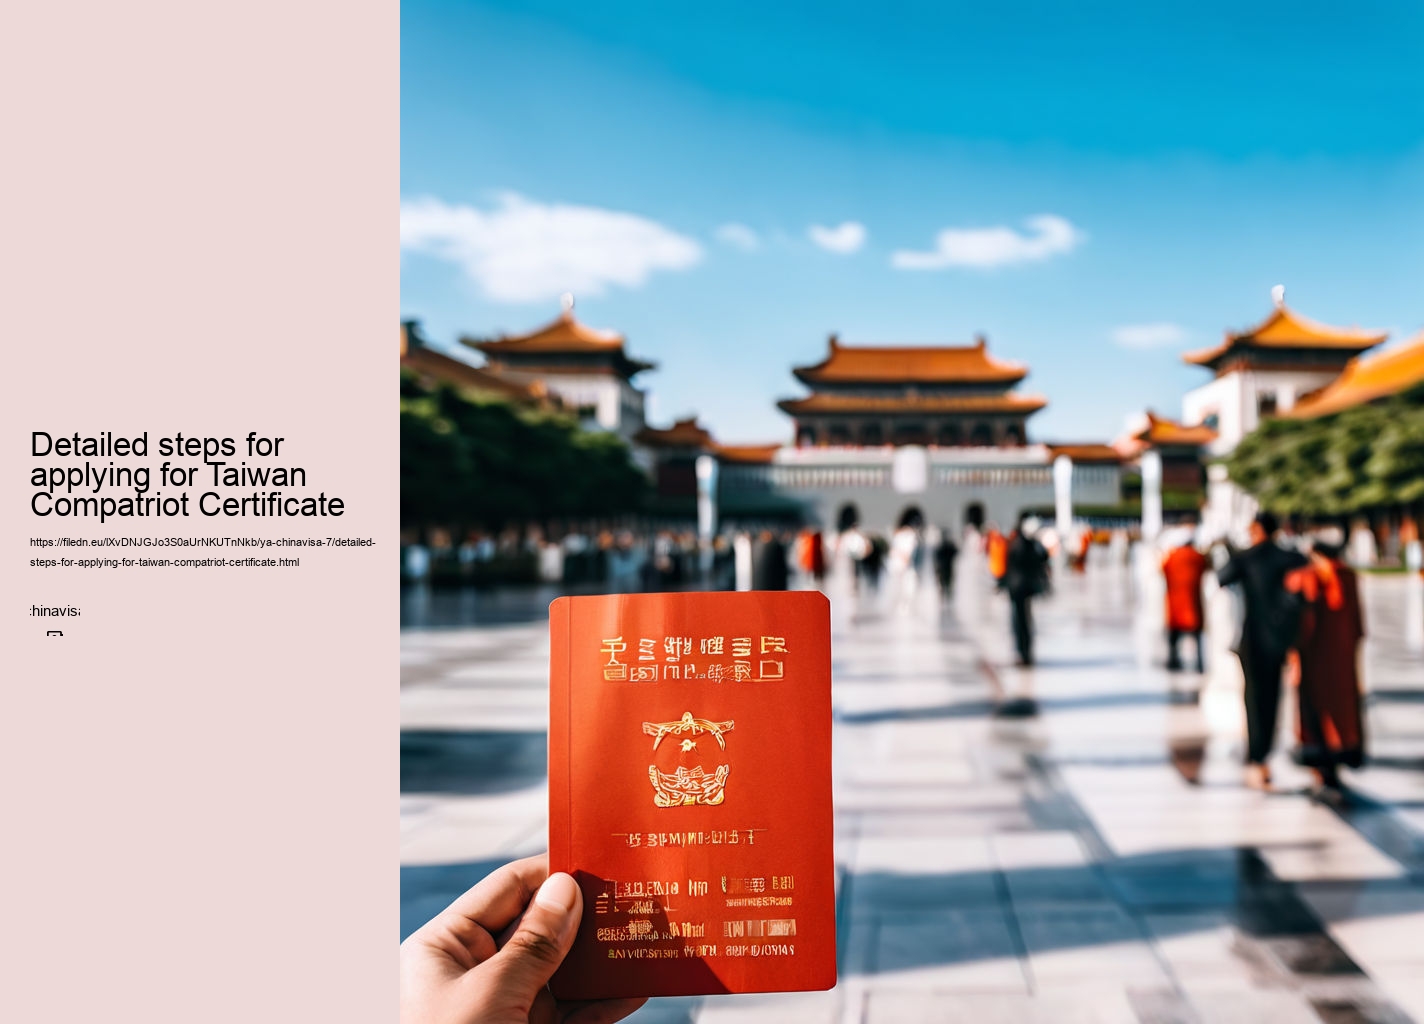 Detailed steps for applying for Taiwan Compatriot Certificate